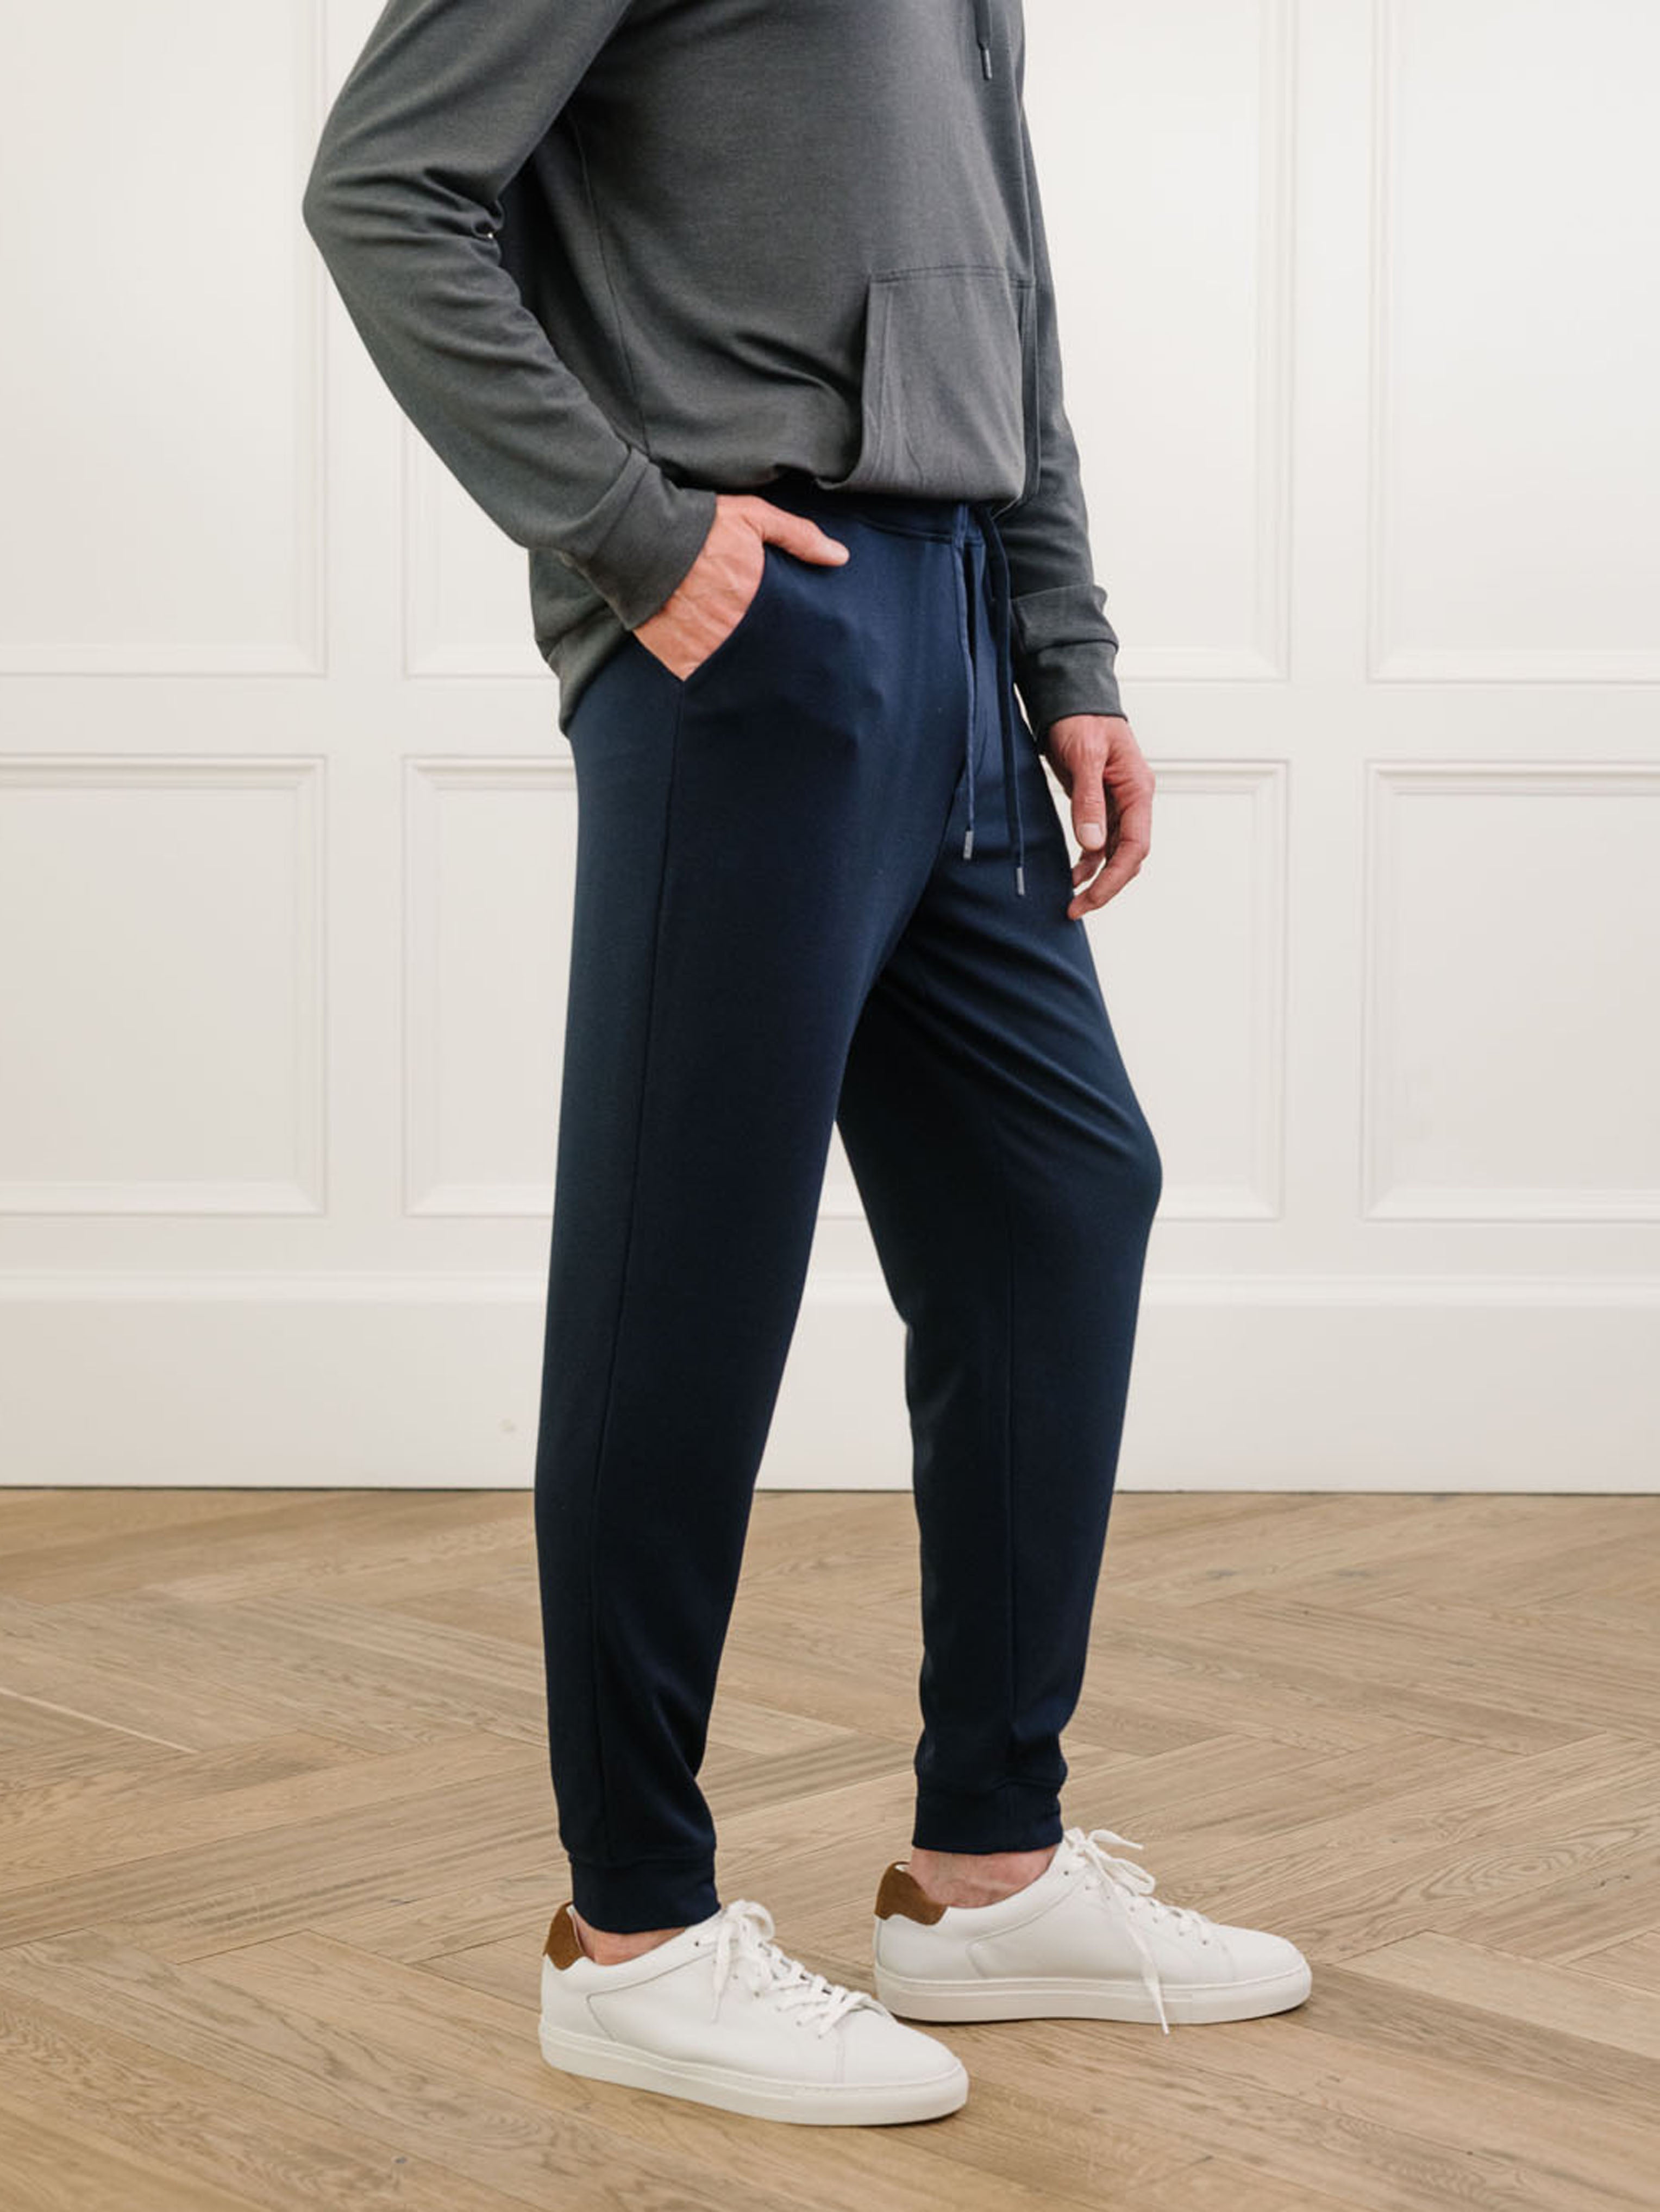 Six Ways To Style Joggers For Cold Weather - Stitch & Salt